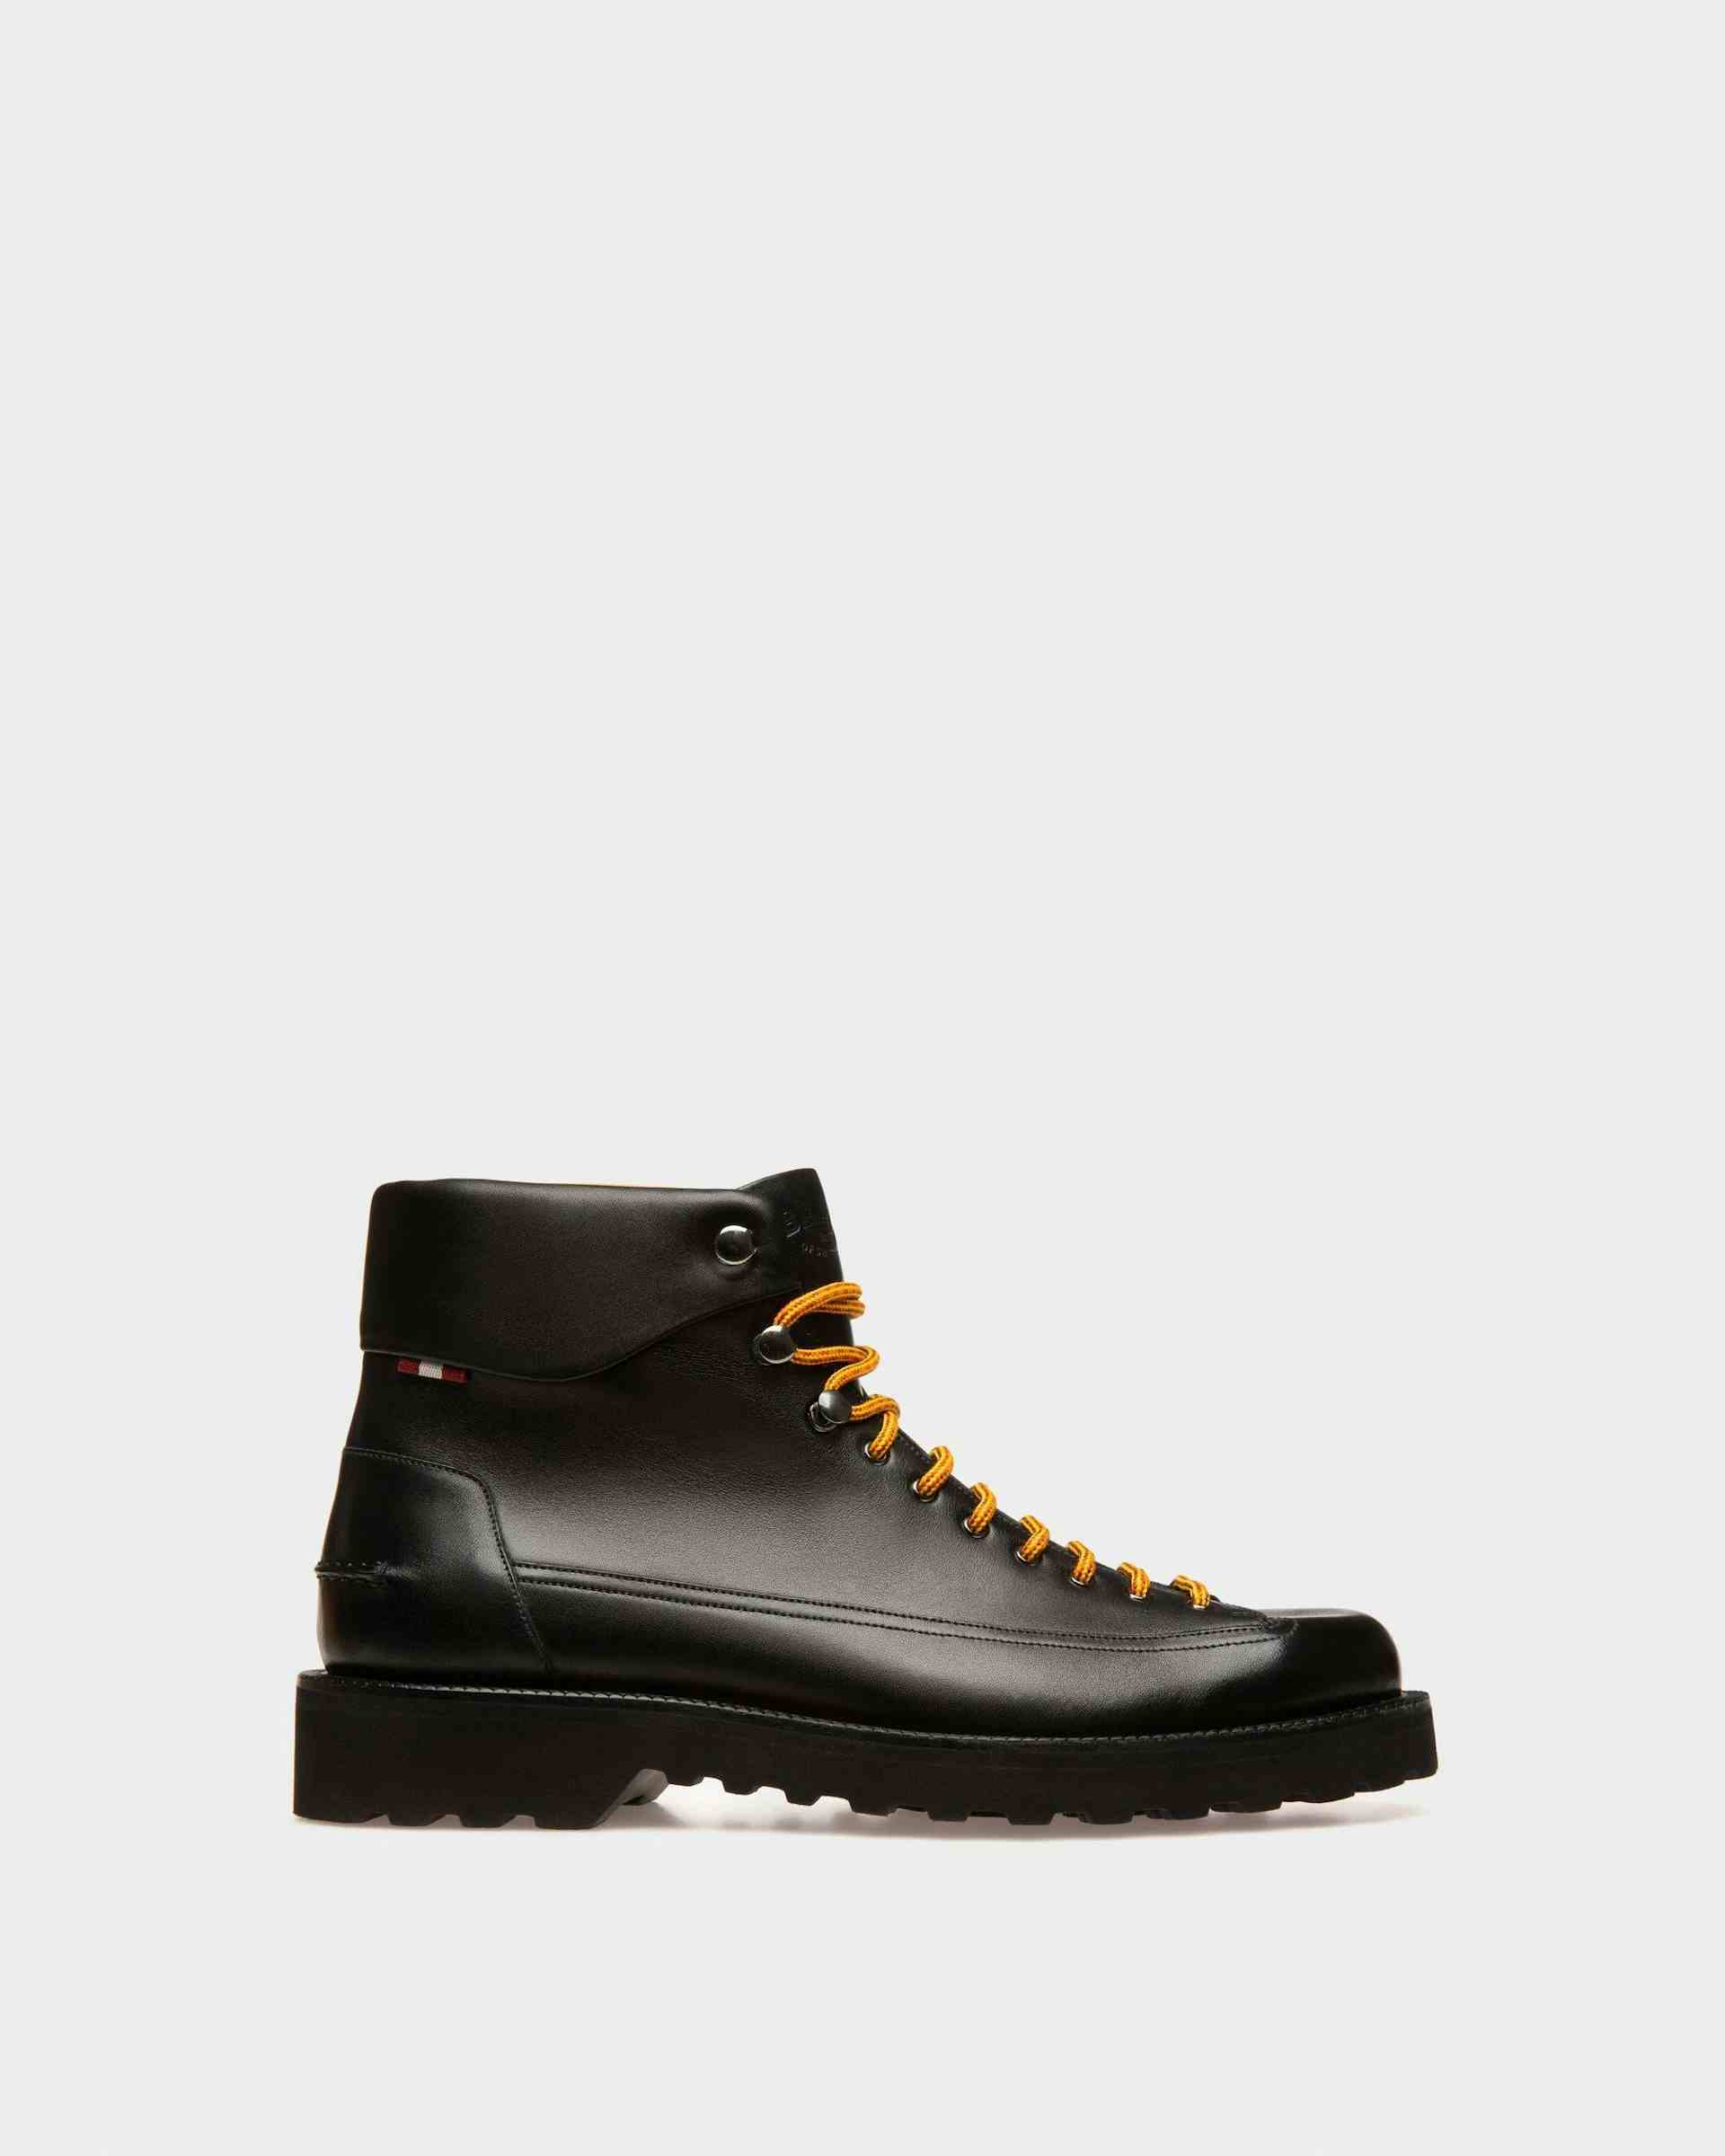 Norkwel Leather Boots In Black - Men's - Bally